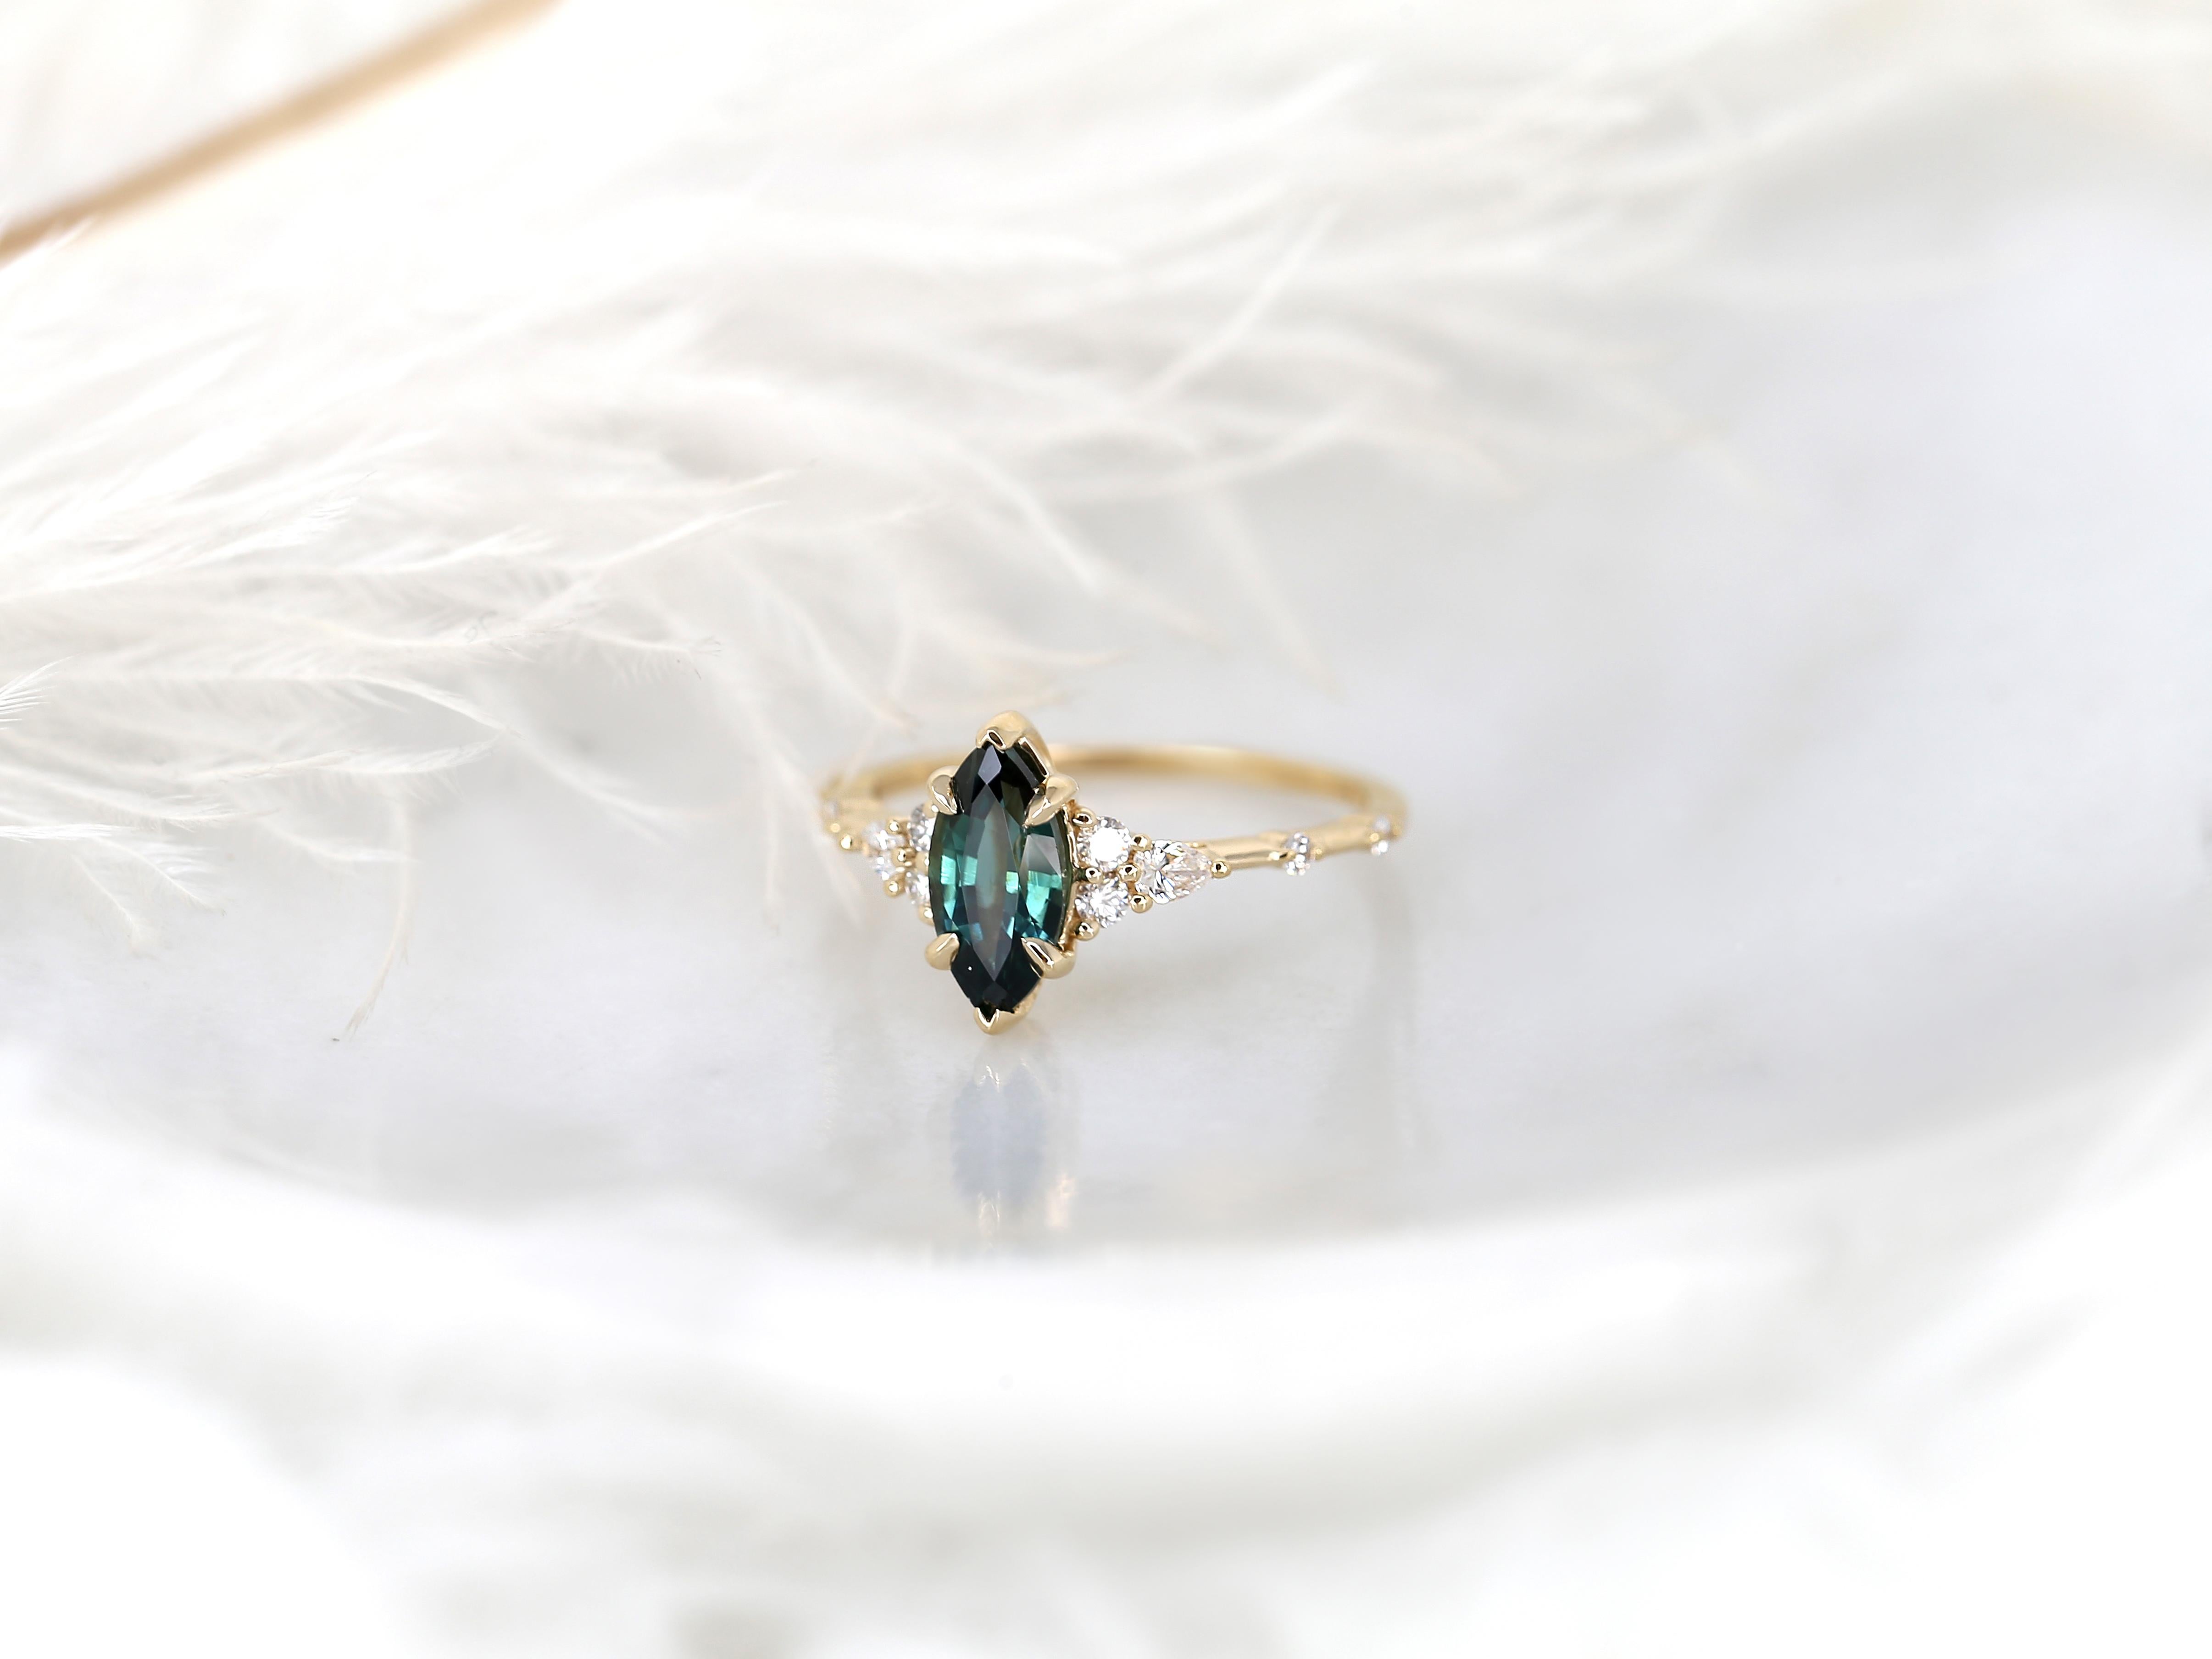 Discover elegance and individuality with our handmade Astrid marquise teal sapphire cluster ring. Crafted in 14kt yellow gold, its dainty shank and distinctive clusters east and west of the center stone captivate with timeless charm.

Details of